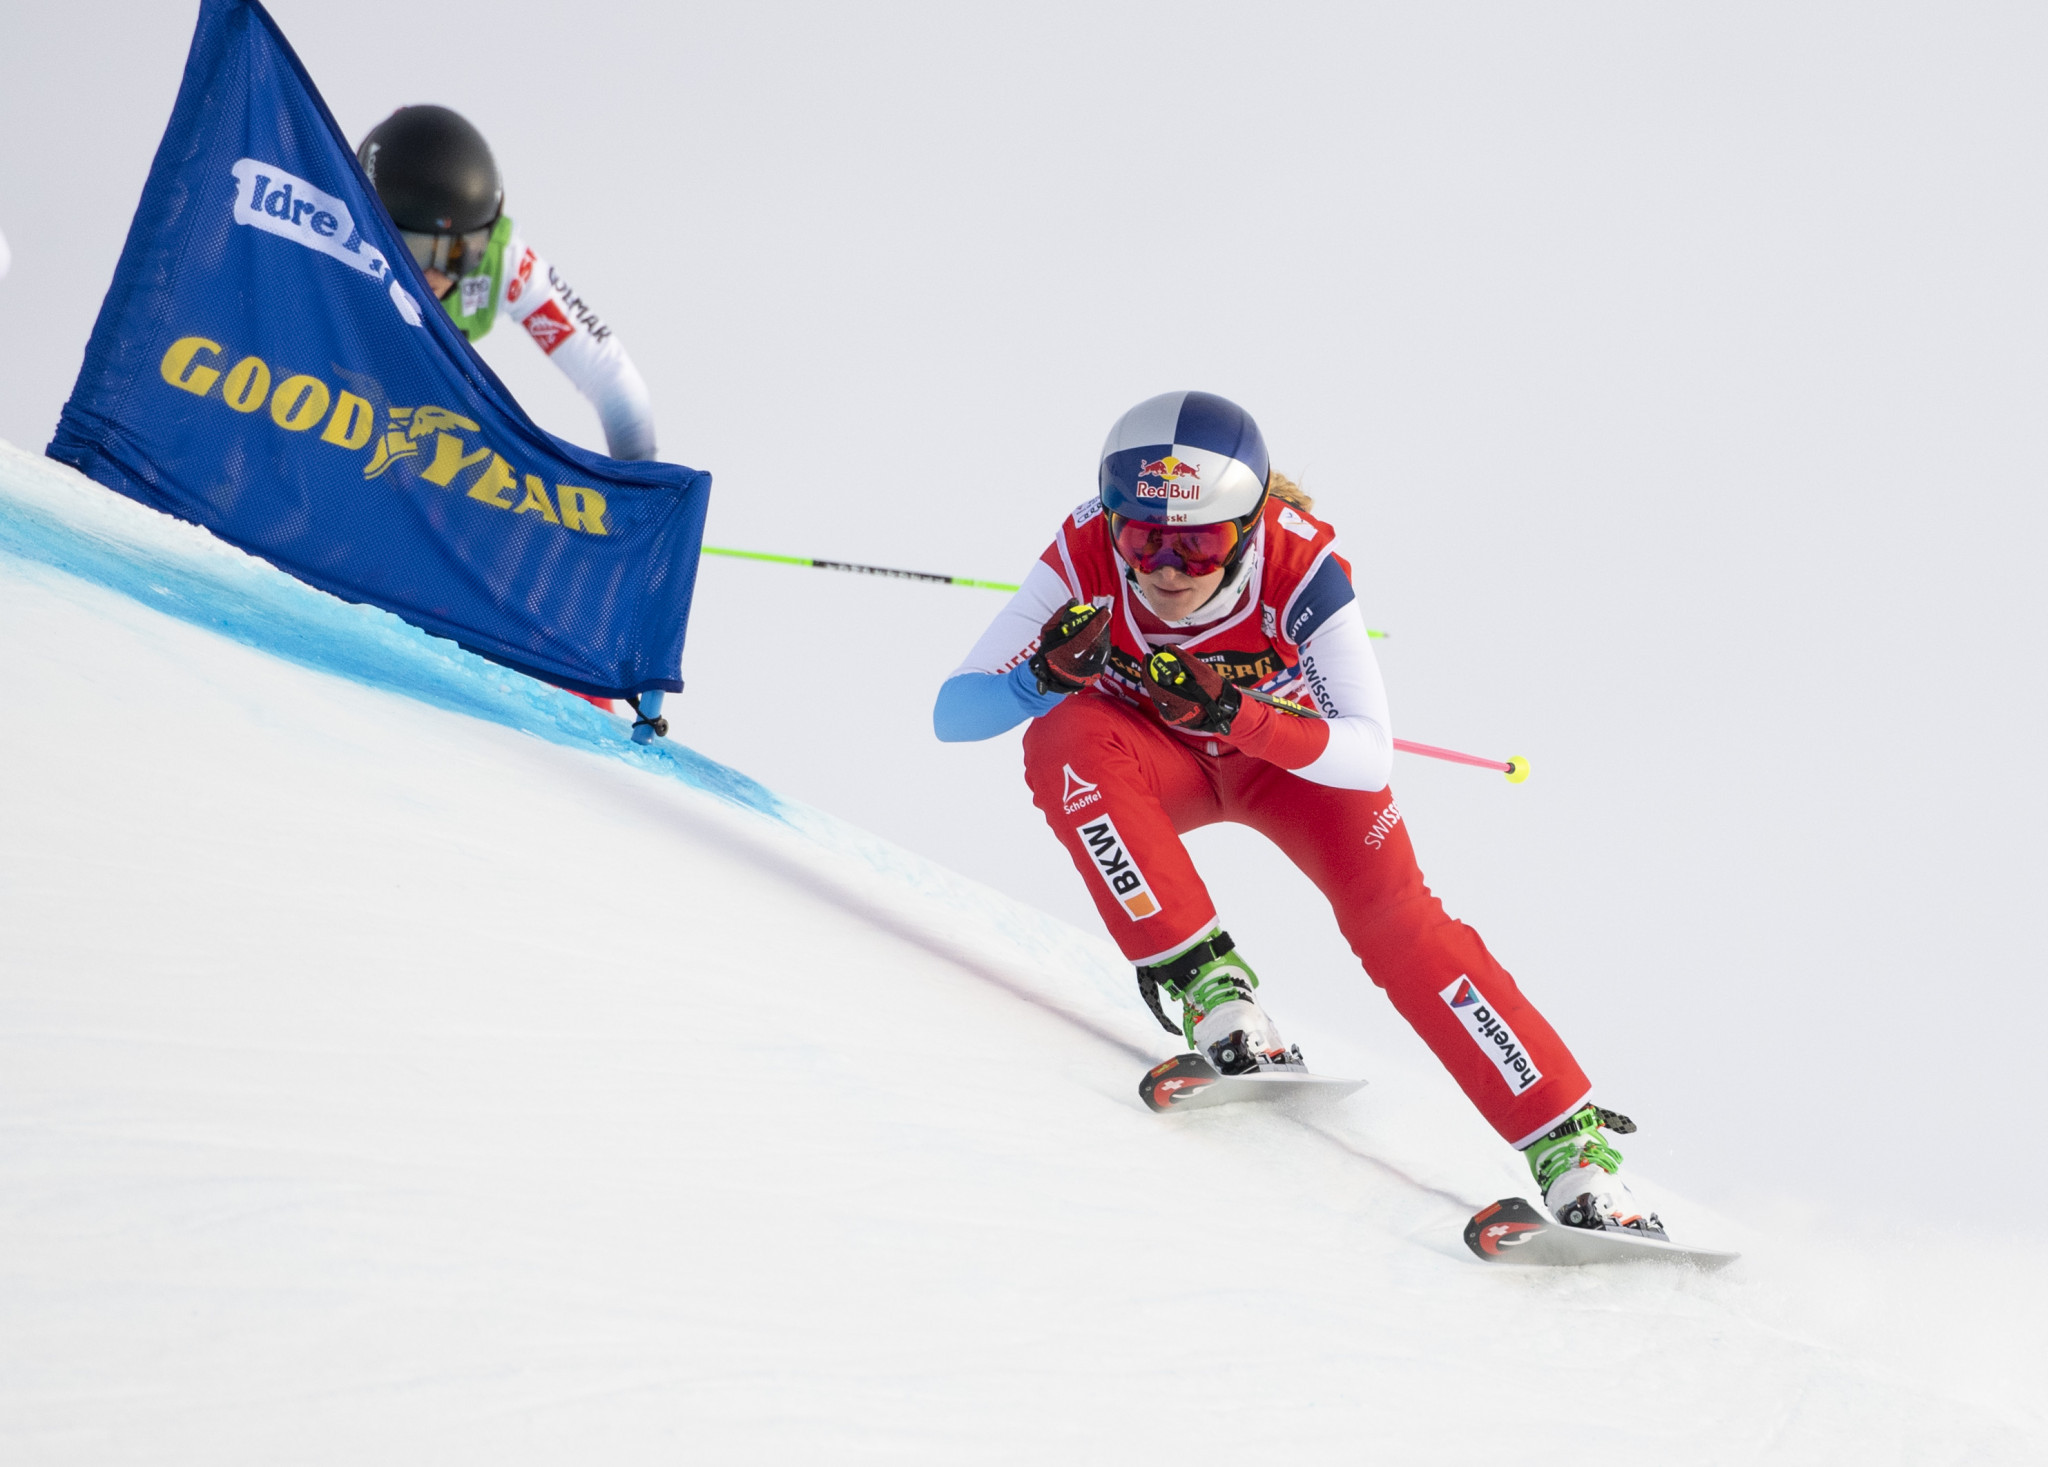 Fanny Smith tied Ophelie David’s record of 26 Ski Cross World Cup wins ©Getty Images